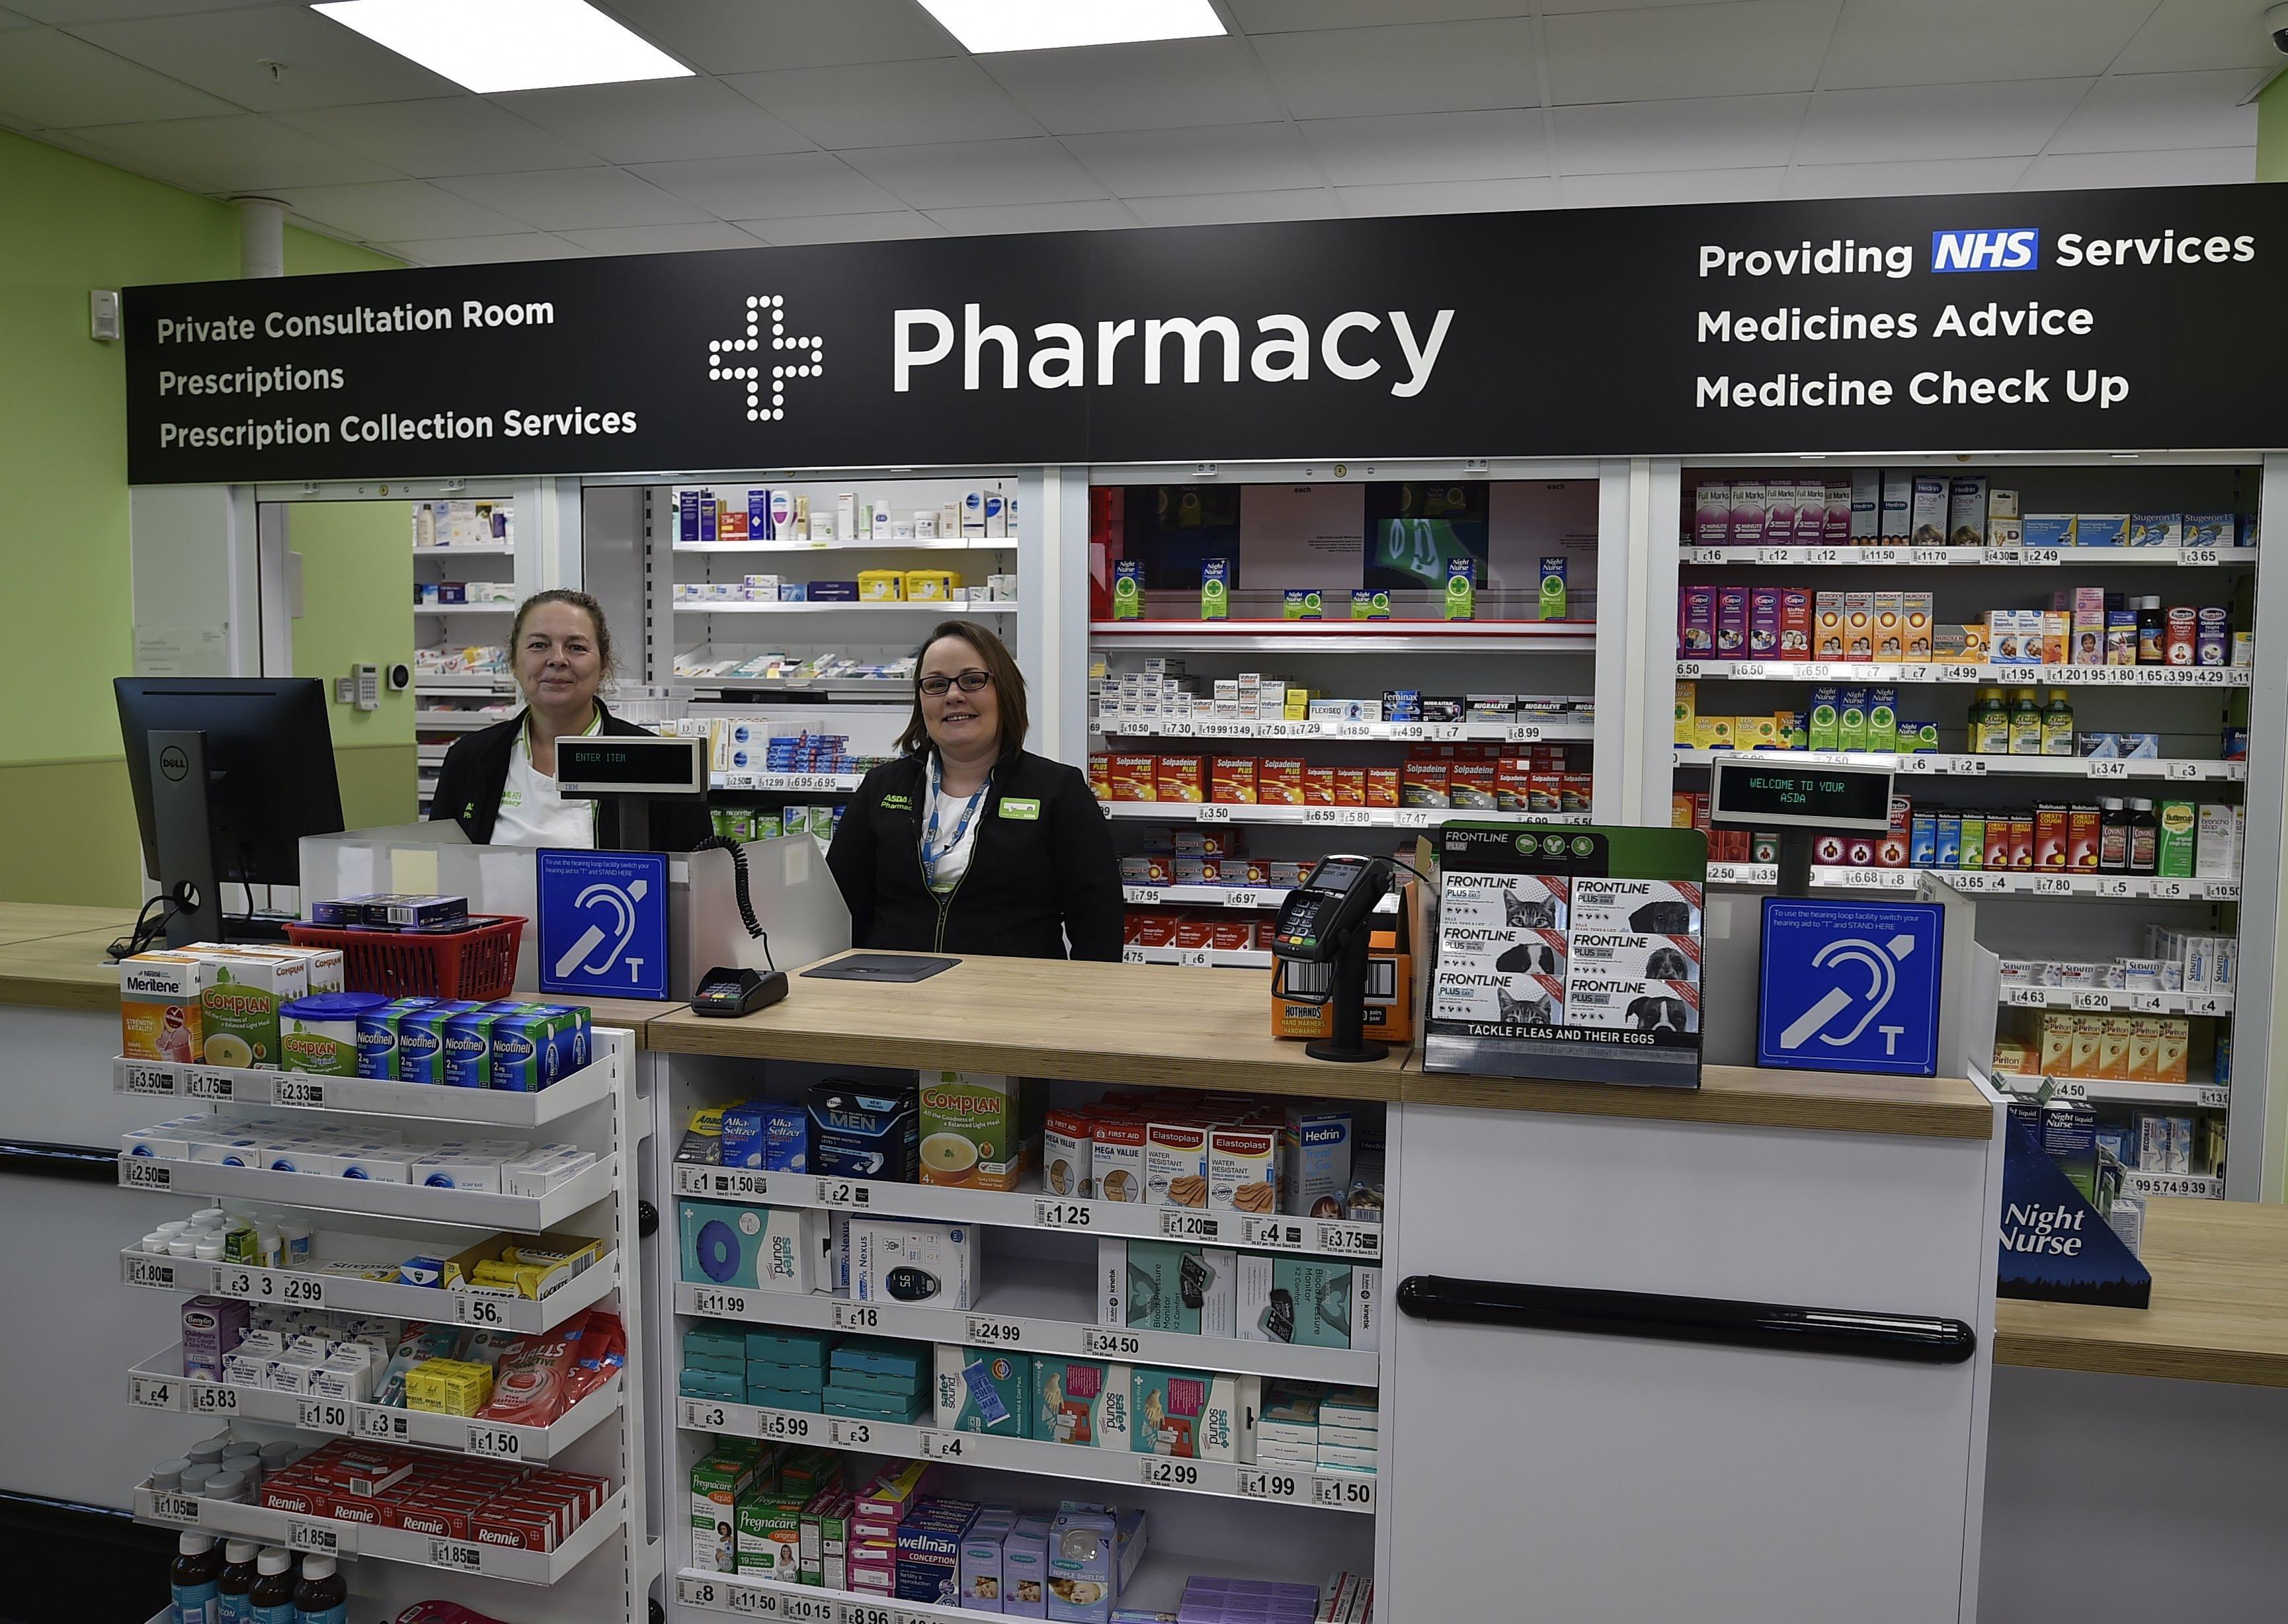 The pharmacy has been relocated to the front of the store